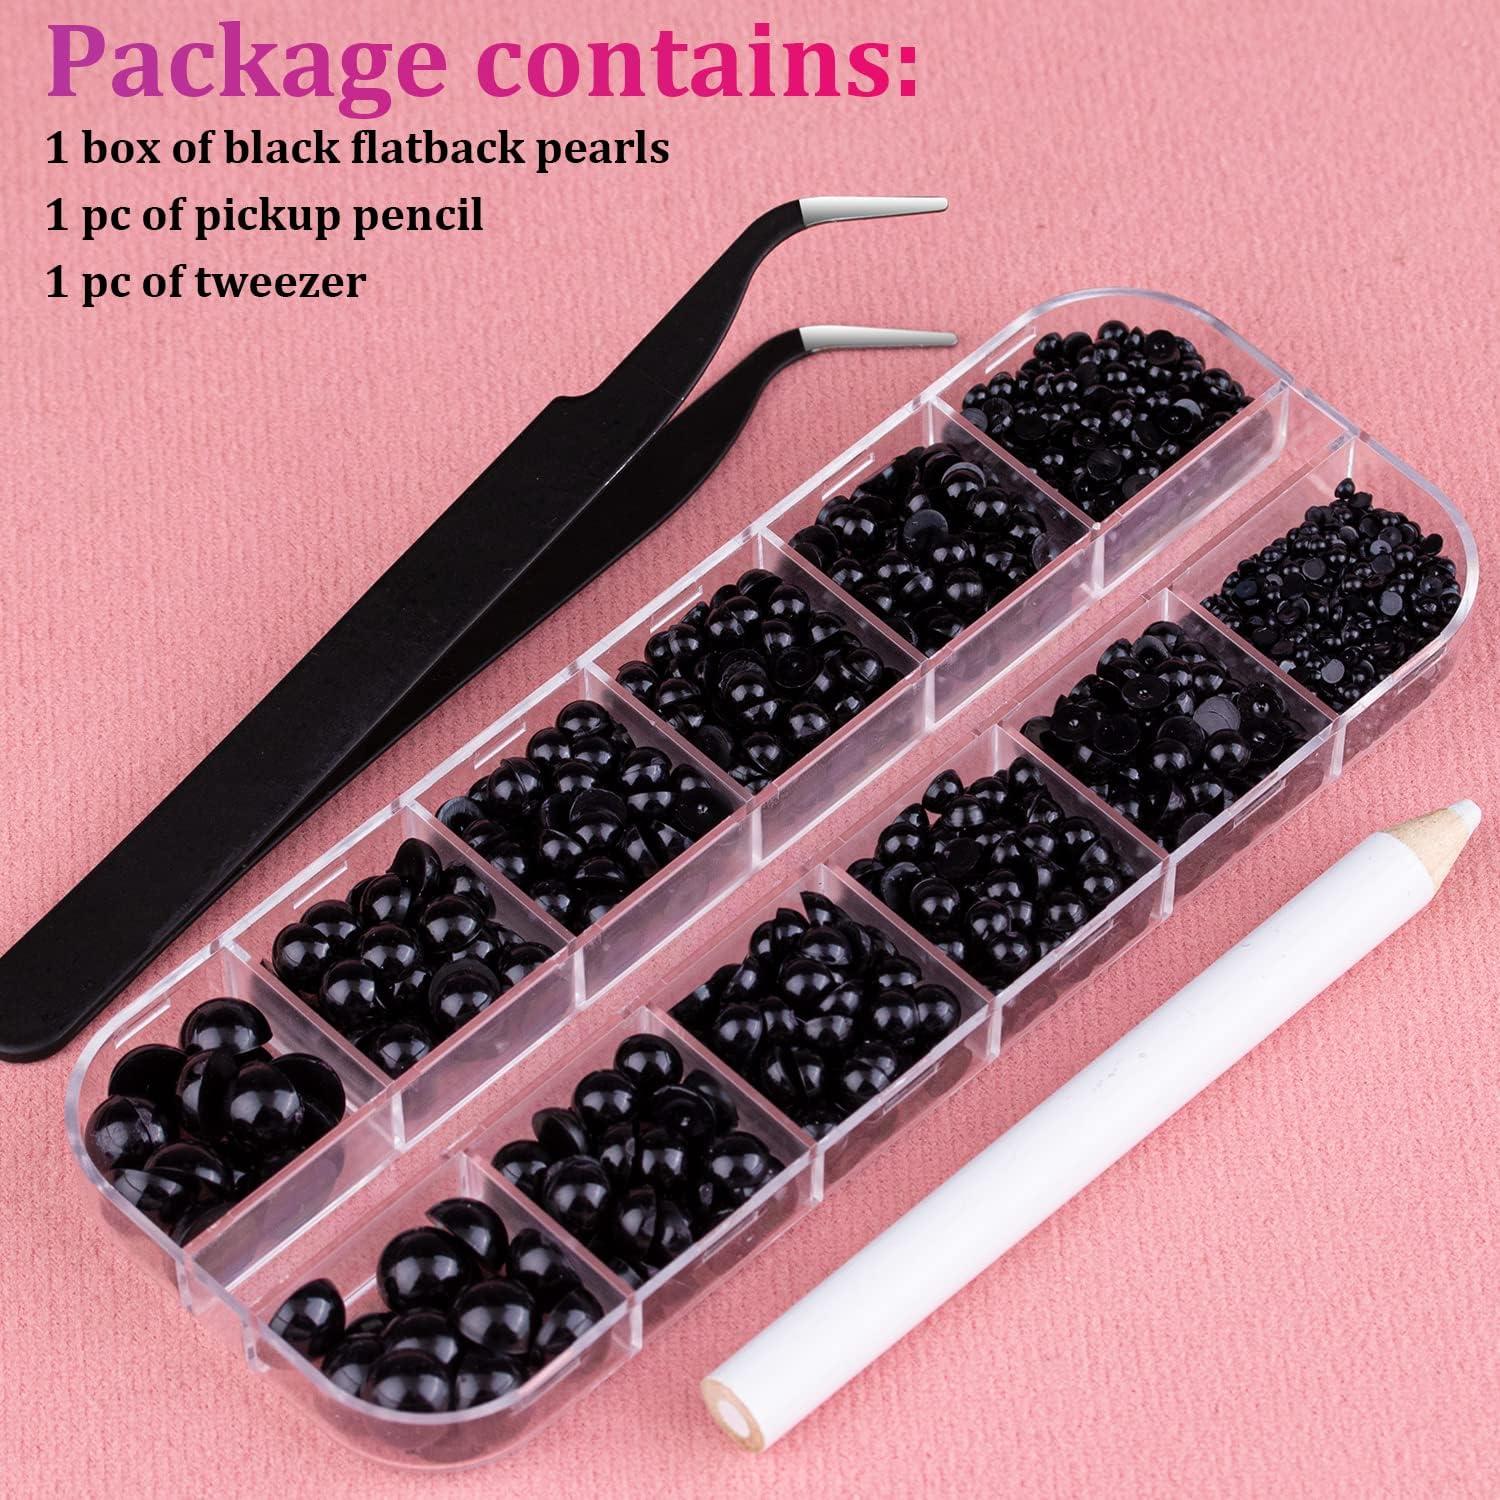 Belleboost Flat Back Pearls Kits 3 Boxes of Flatback White Half Round Pearls  with Pickup Pencil and Tweezer for Home DIY and Professional Nail Art, Face  Makeup and Craft 